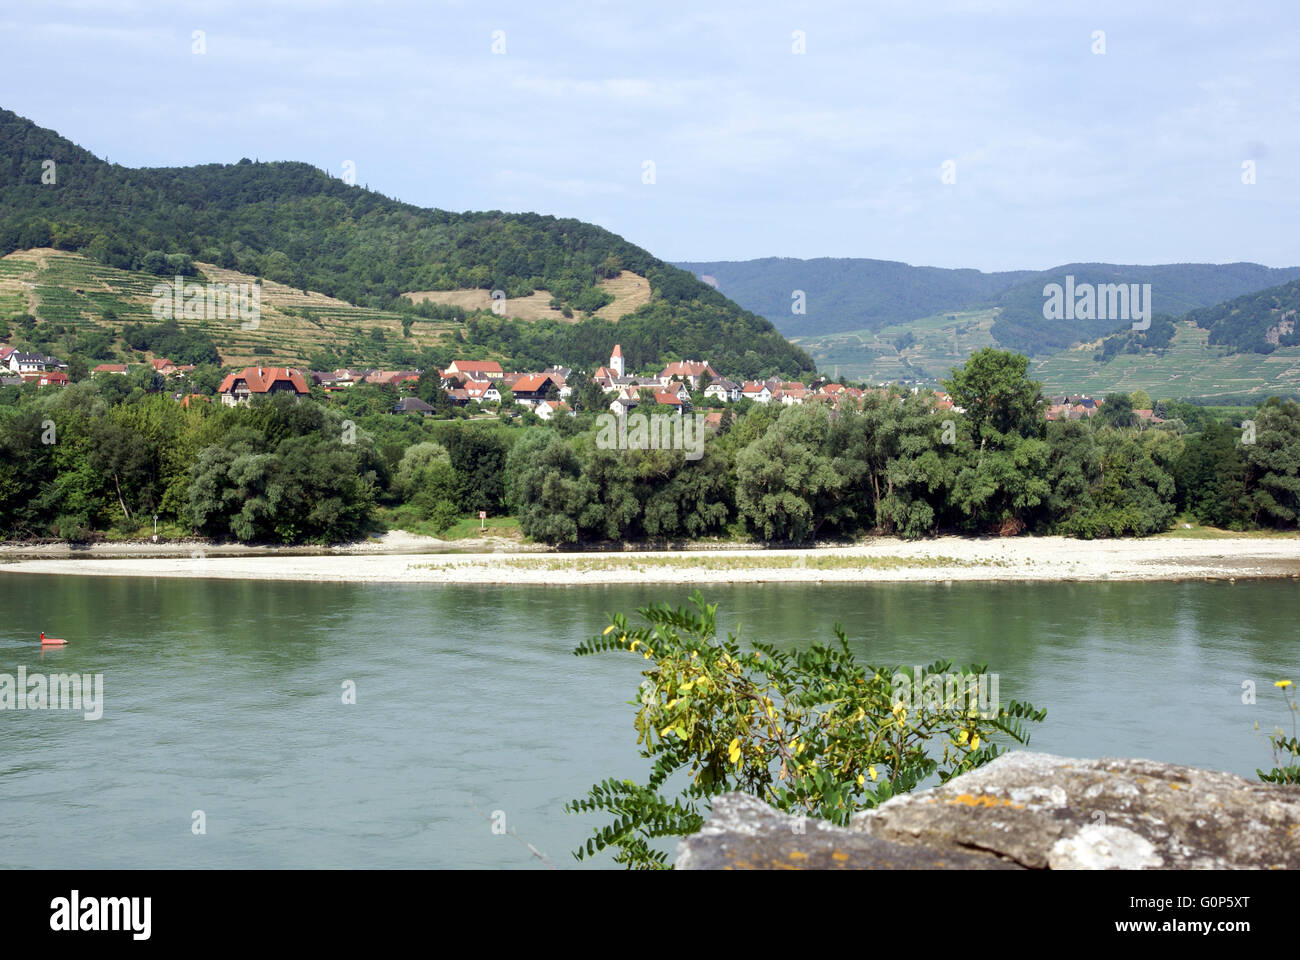 Durnstein, a small town on the Danube river in the Krems-Land district, in the Austrian state of Lower Austria. Stock Photo